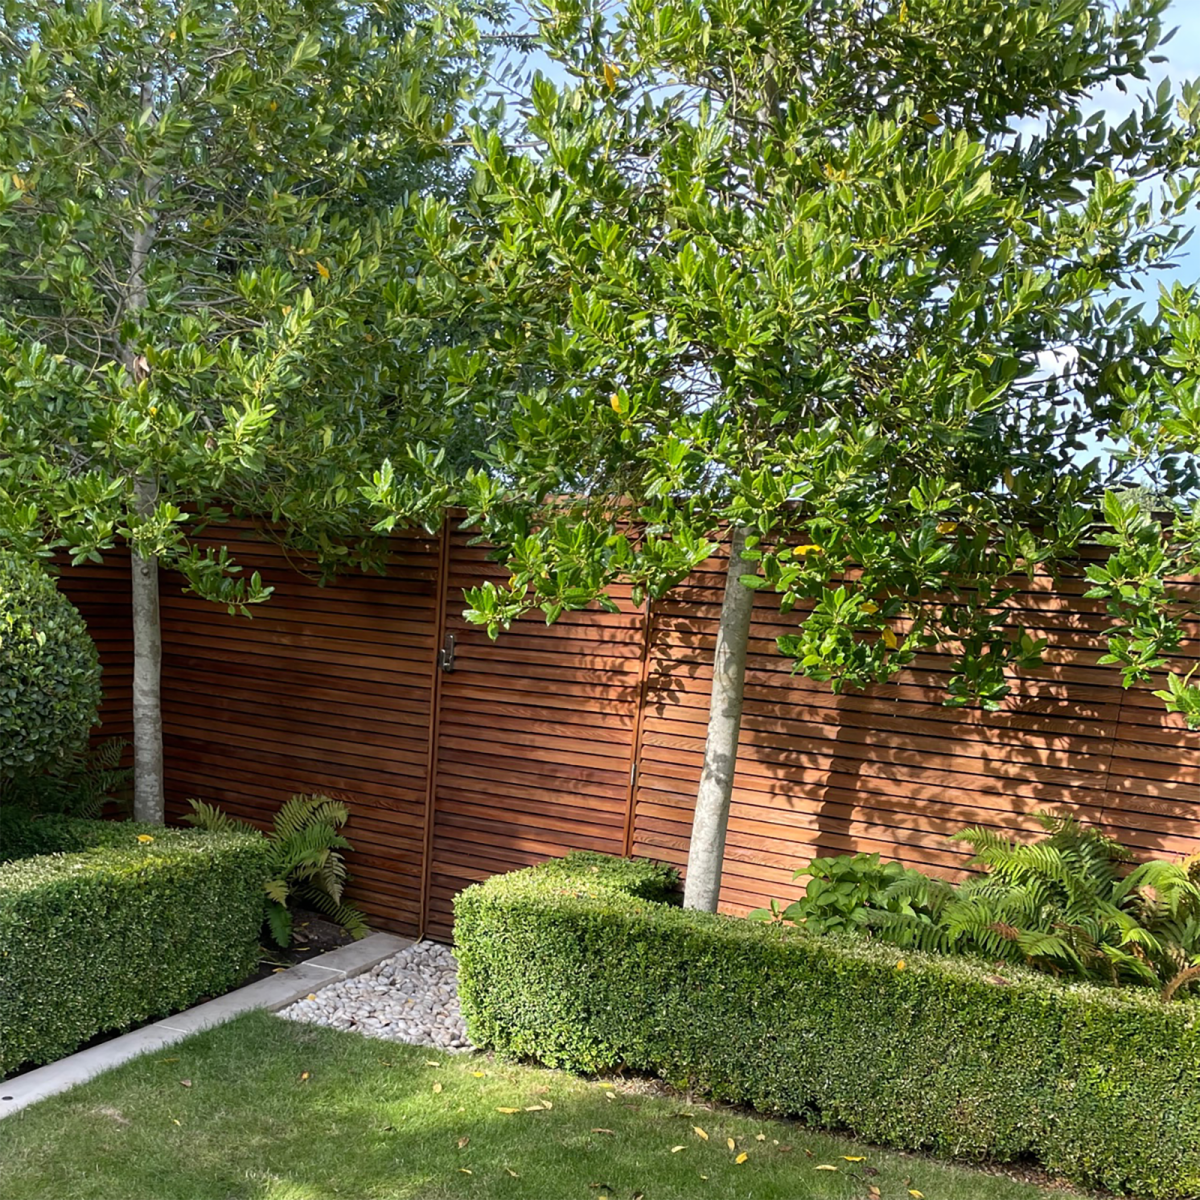 A bright red Cedar slatted gate contrasted with the calm hues of greenery.